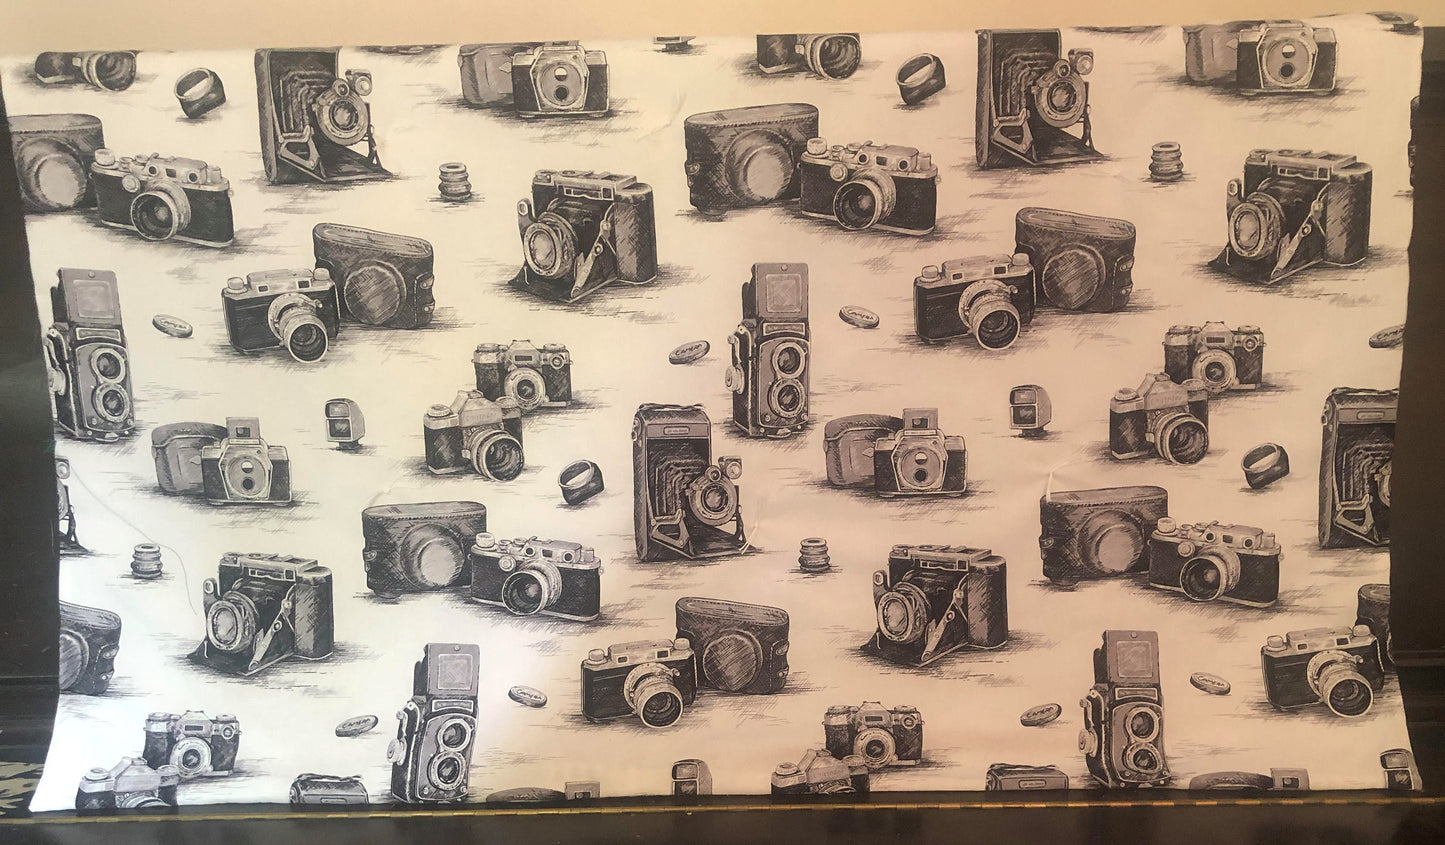 Vintage-Like Camera Lap Quilt/Throw